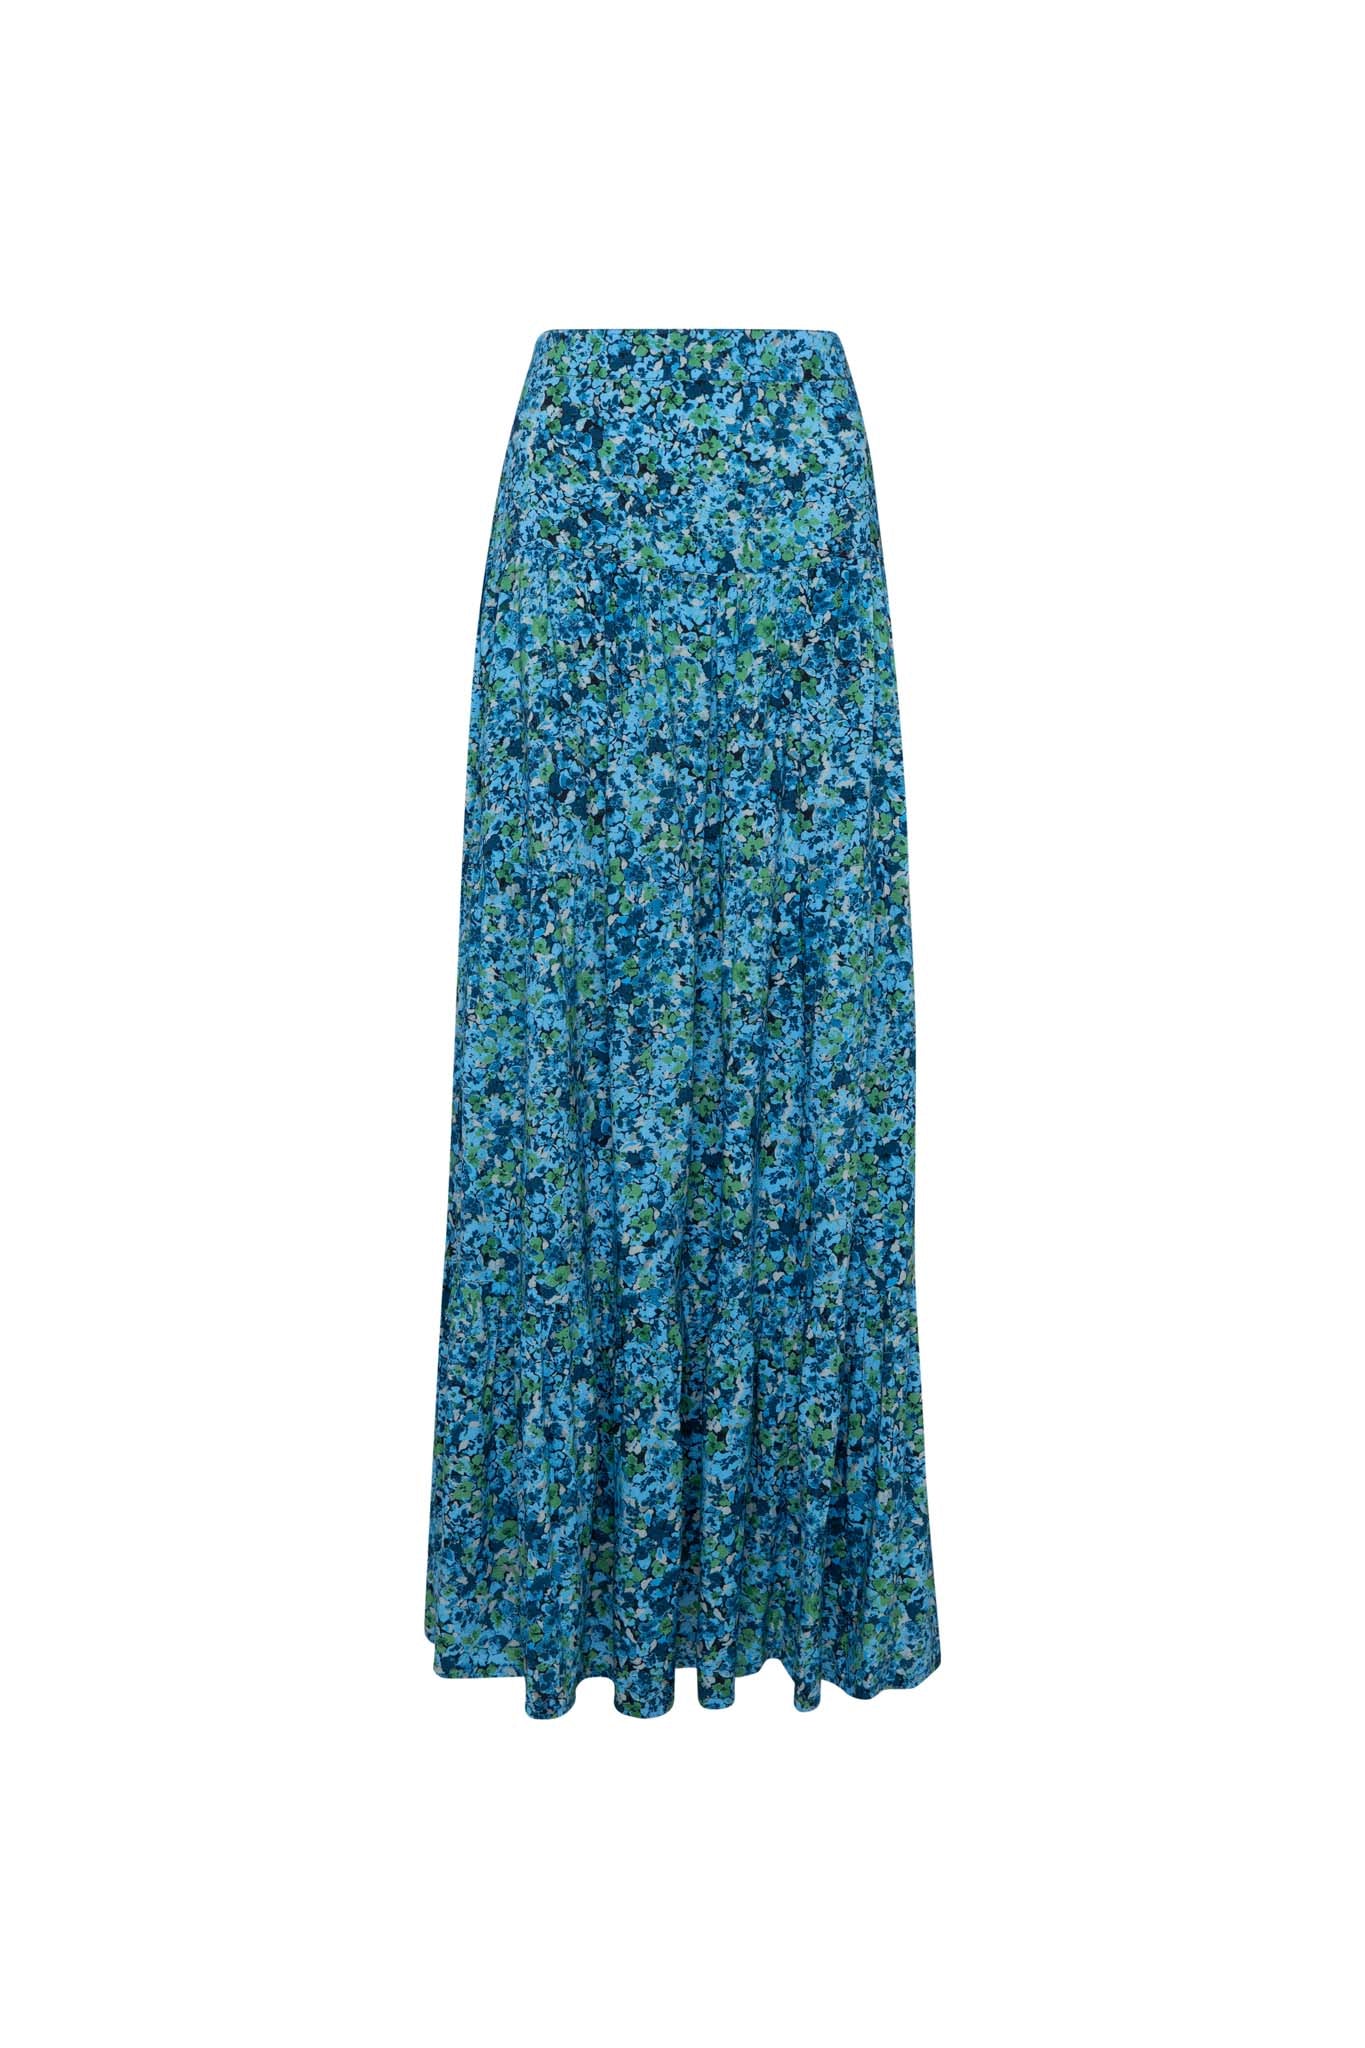 THE SKY HIGH WAISTED MAXI SKIRT - FLORAL EXPLOSION BLUE – State of Georgia